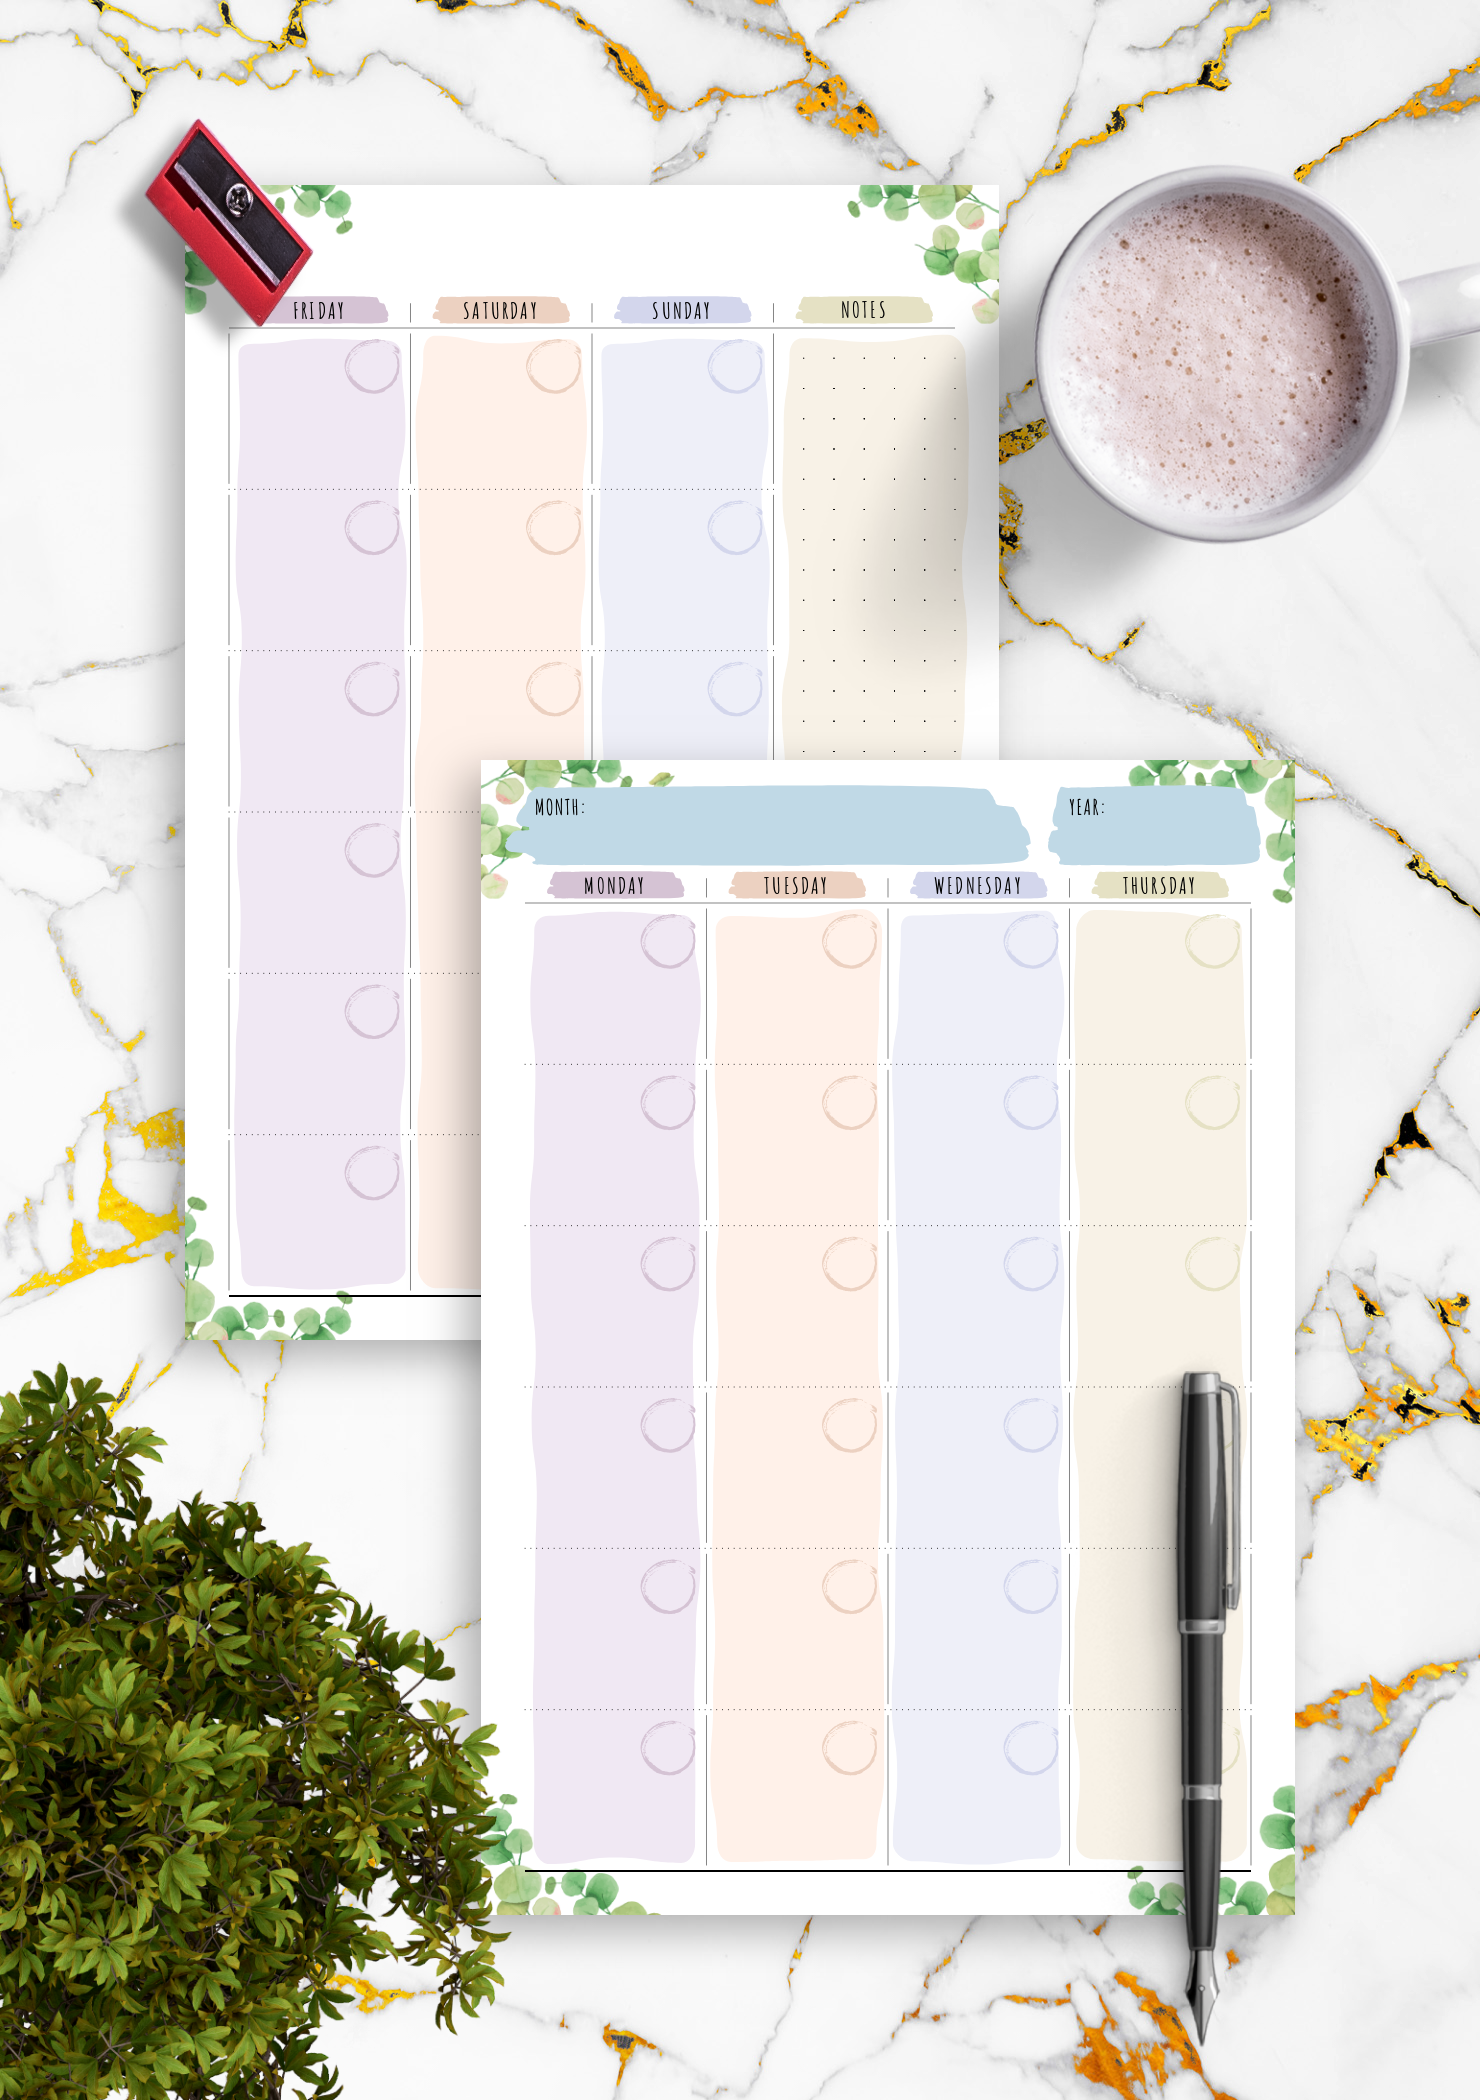 download printable monthly calendar planner undated floral style pdf